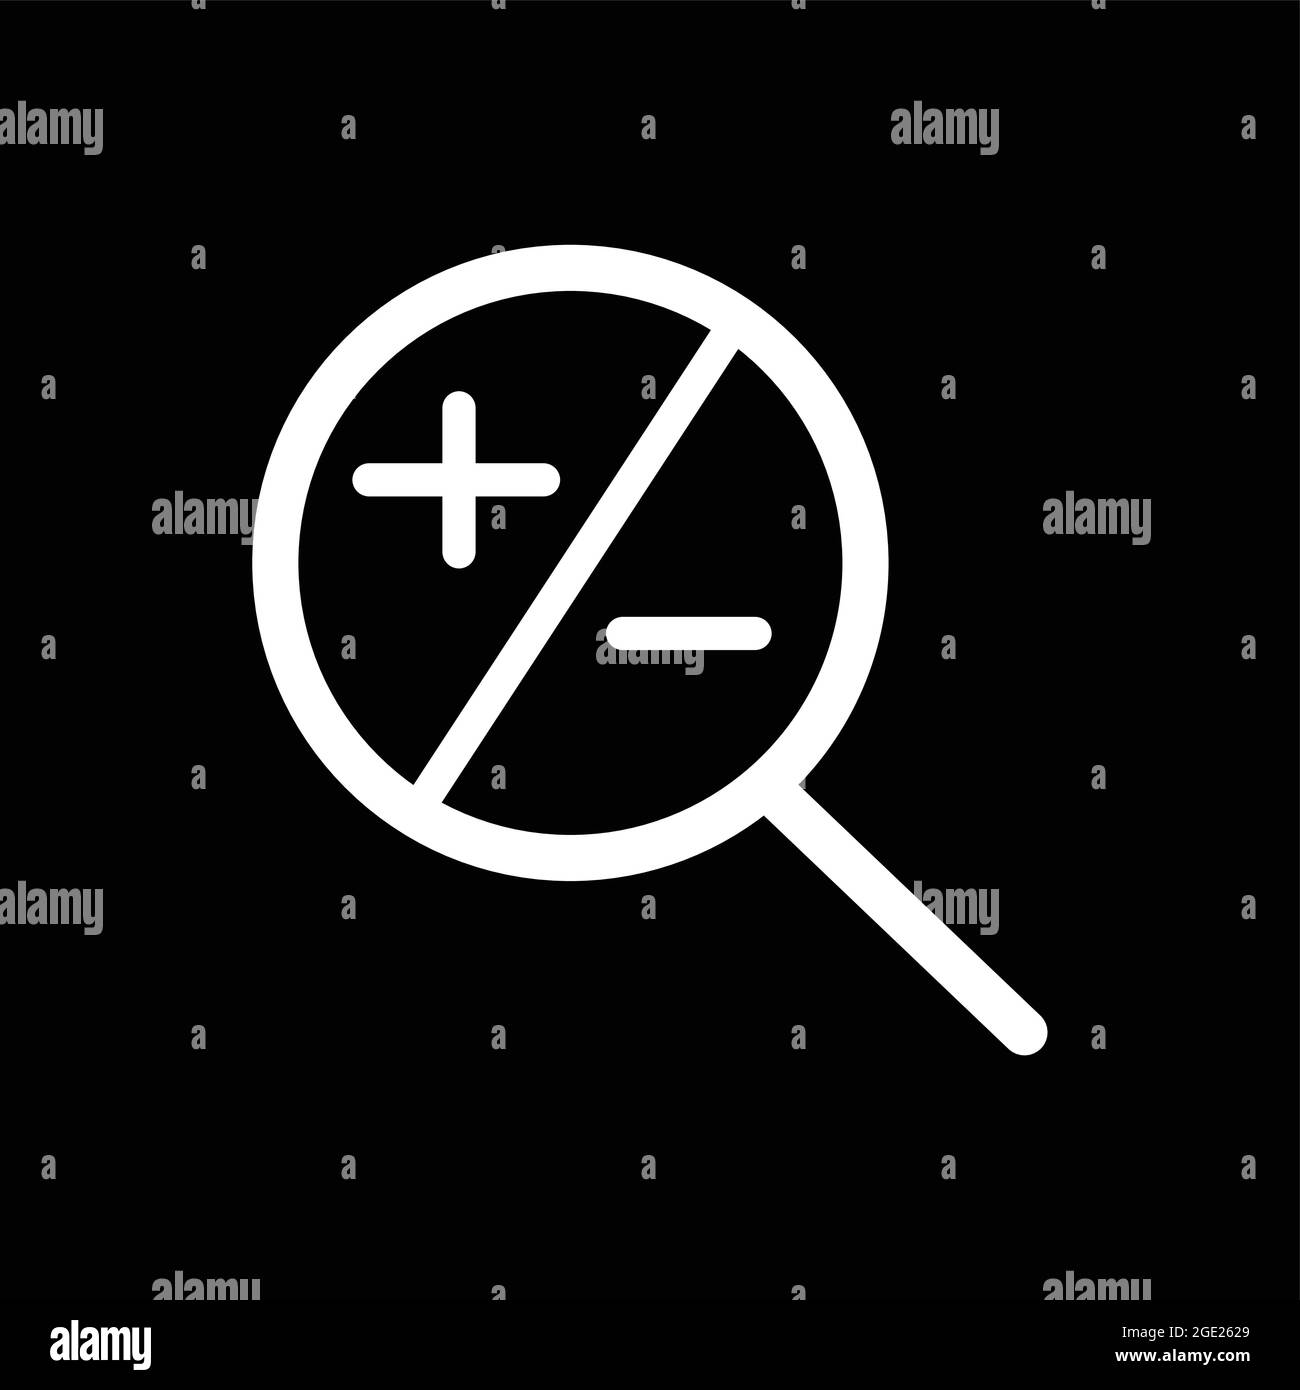 Zoom In and Zoom Out Icons. Simple zoom in, zoom out, magnifier glass icons vector isolated. Stock Vector